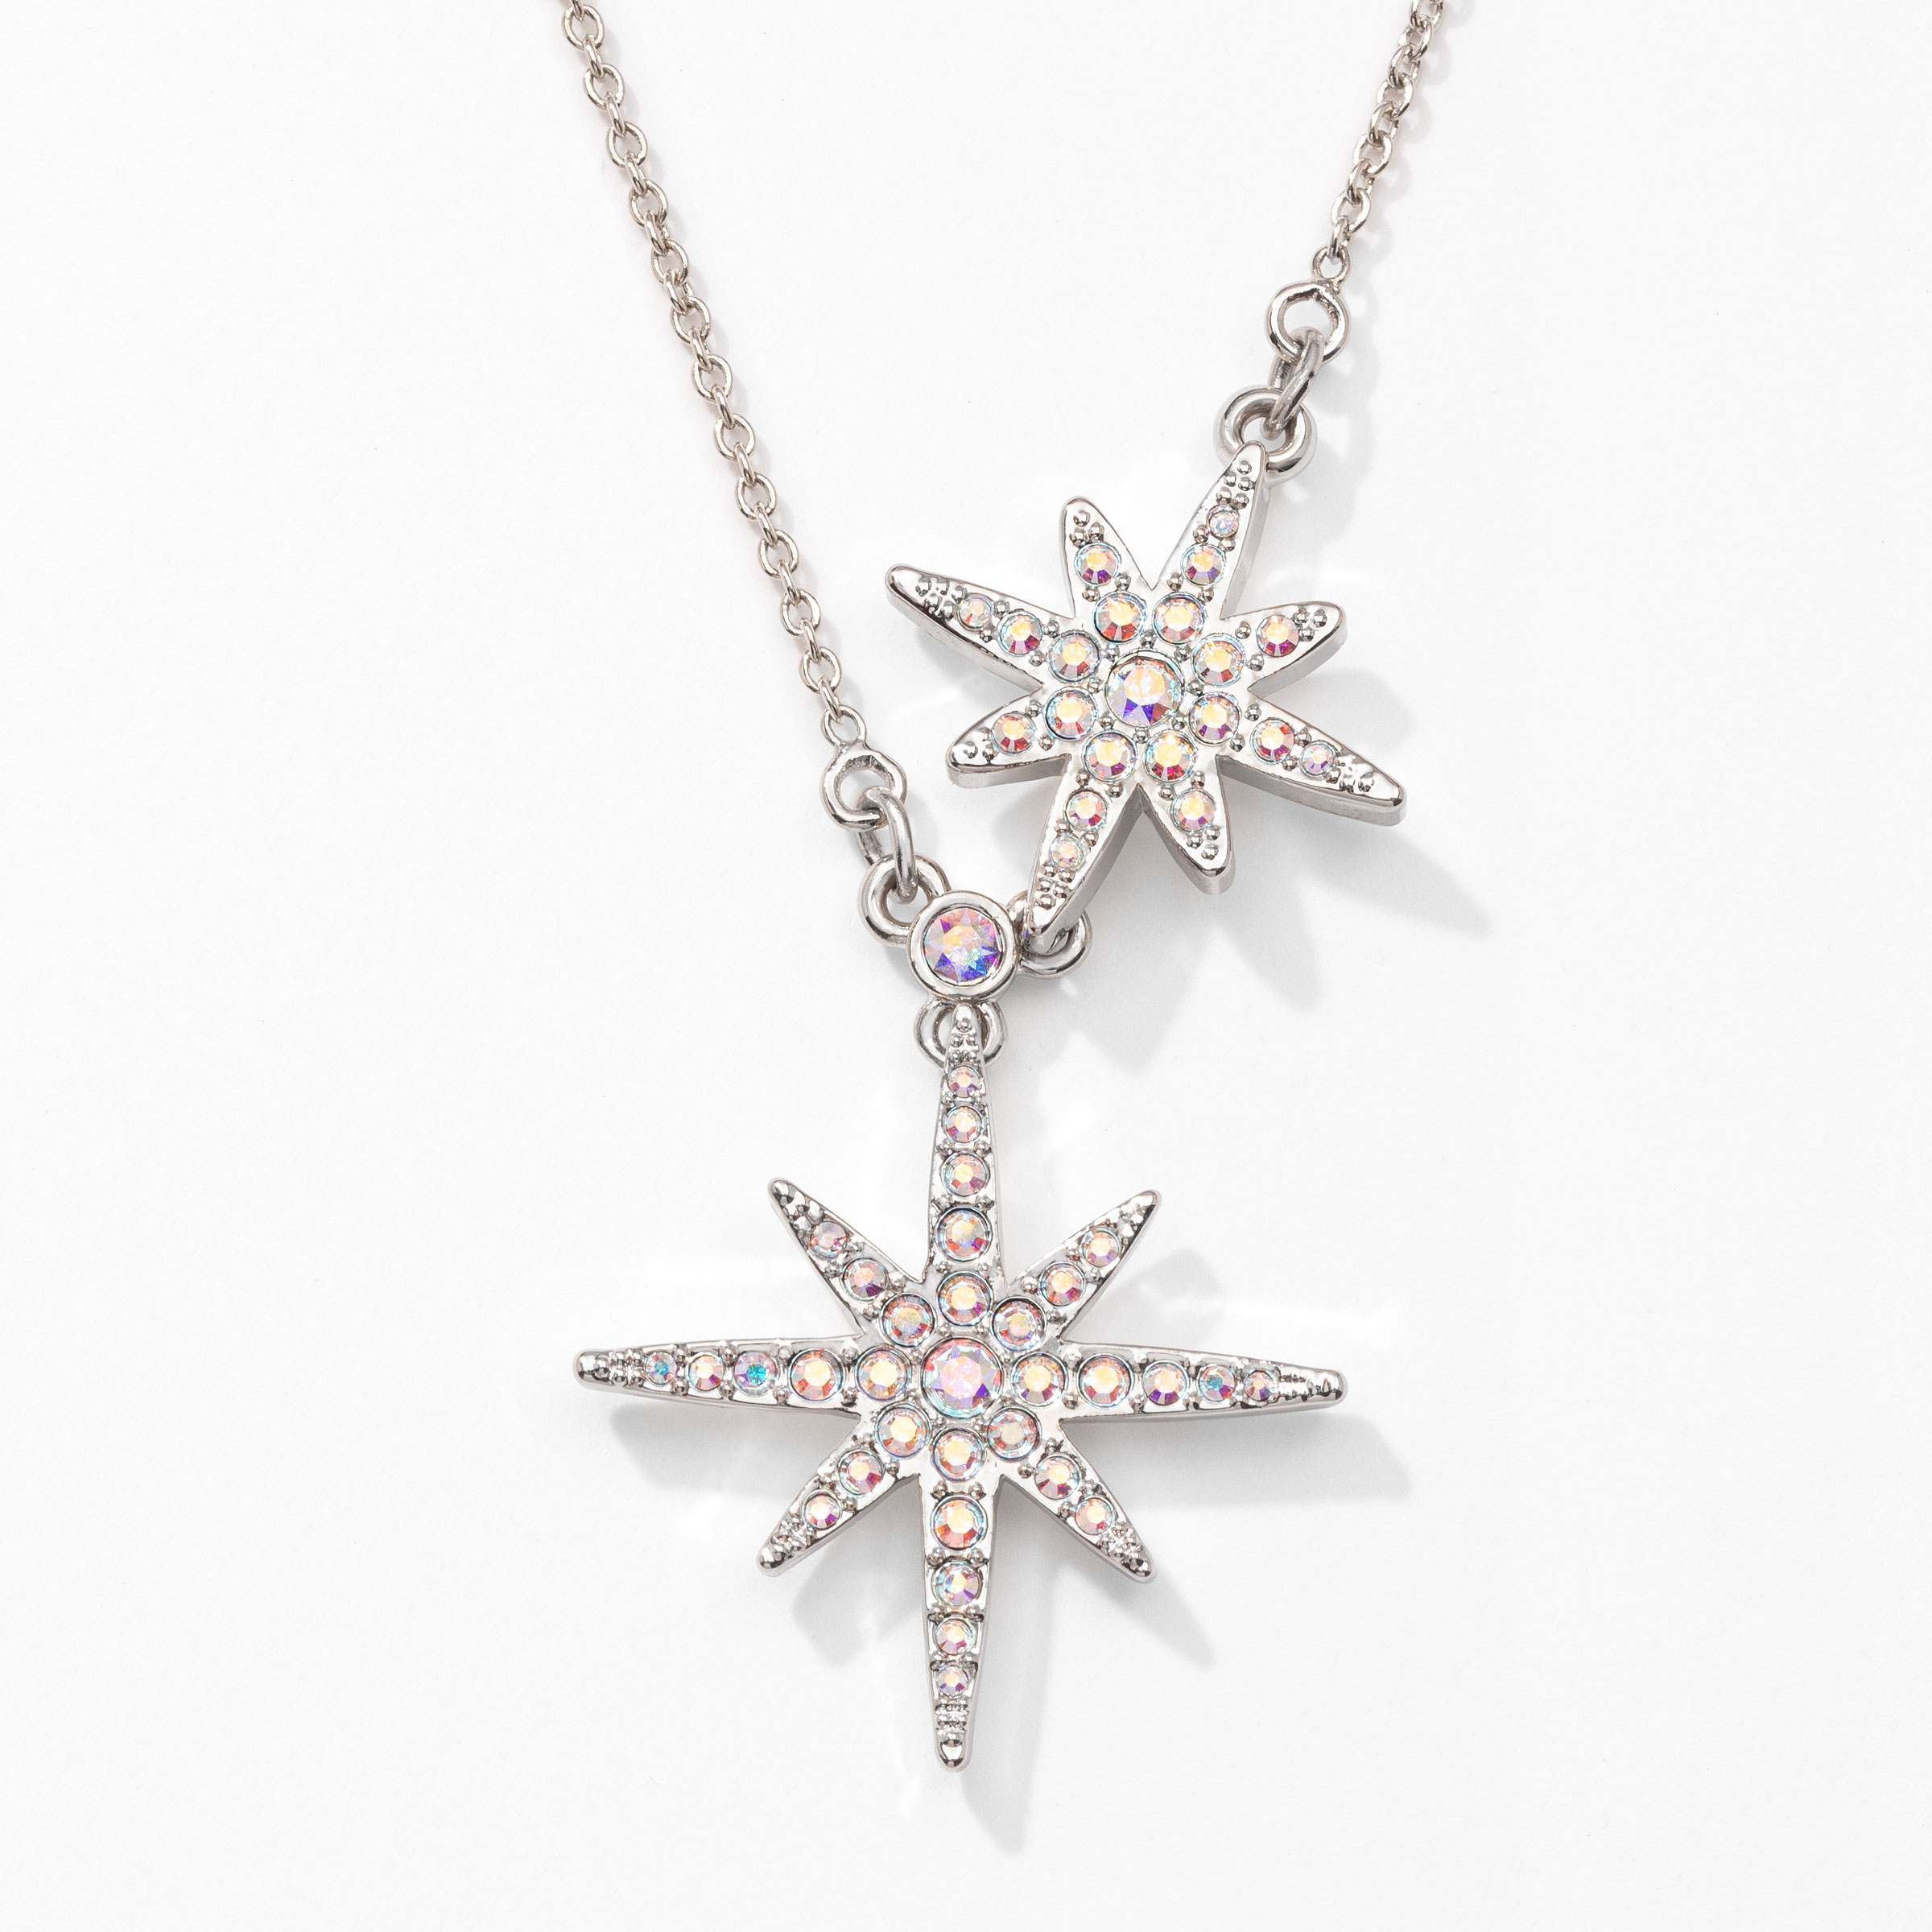 Silver Beaded Necklace - All The Falling Stars